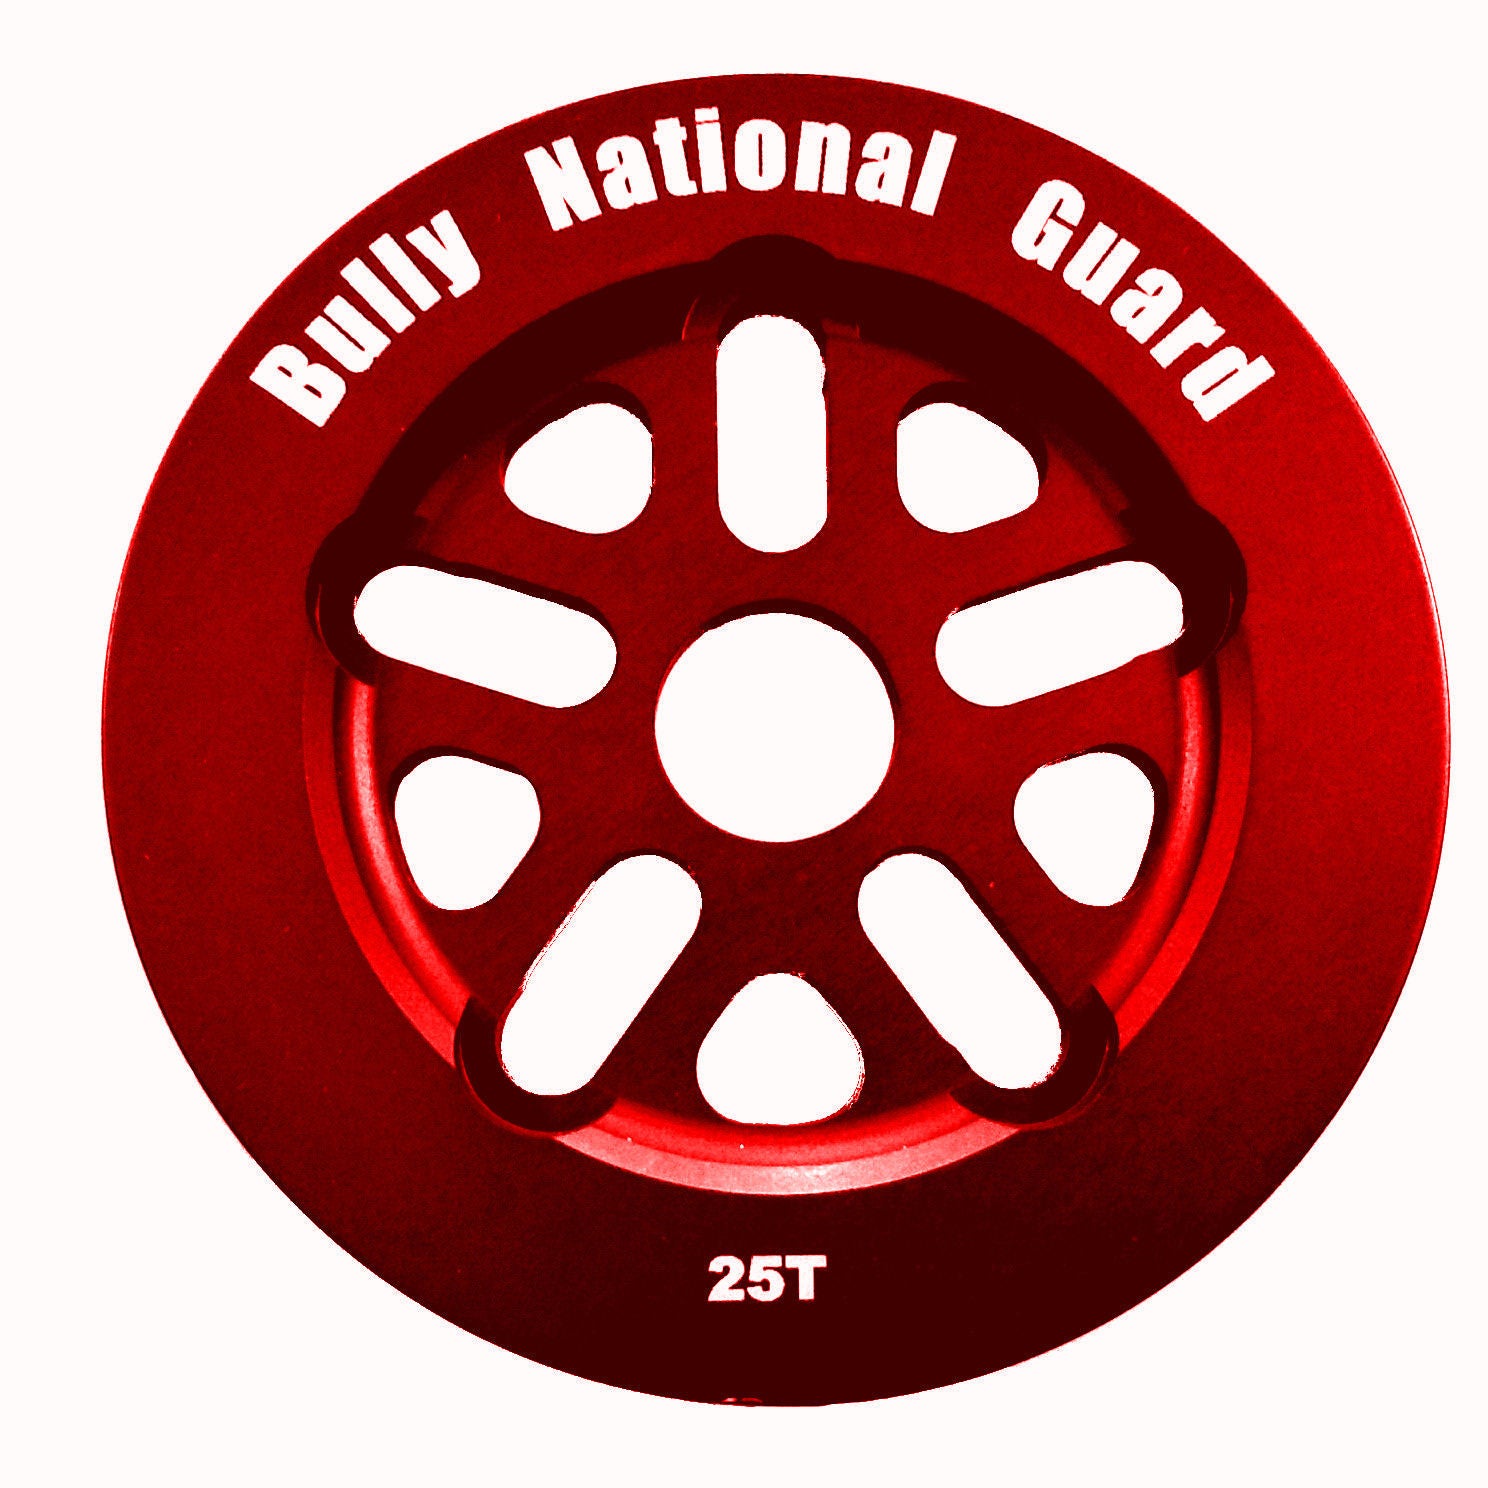 Bully National Guard 25t Sprocket Chainwheel - Red - USA Made